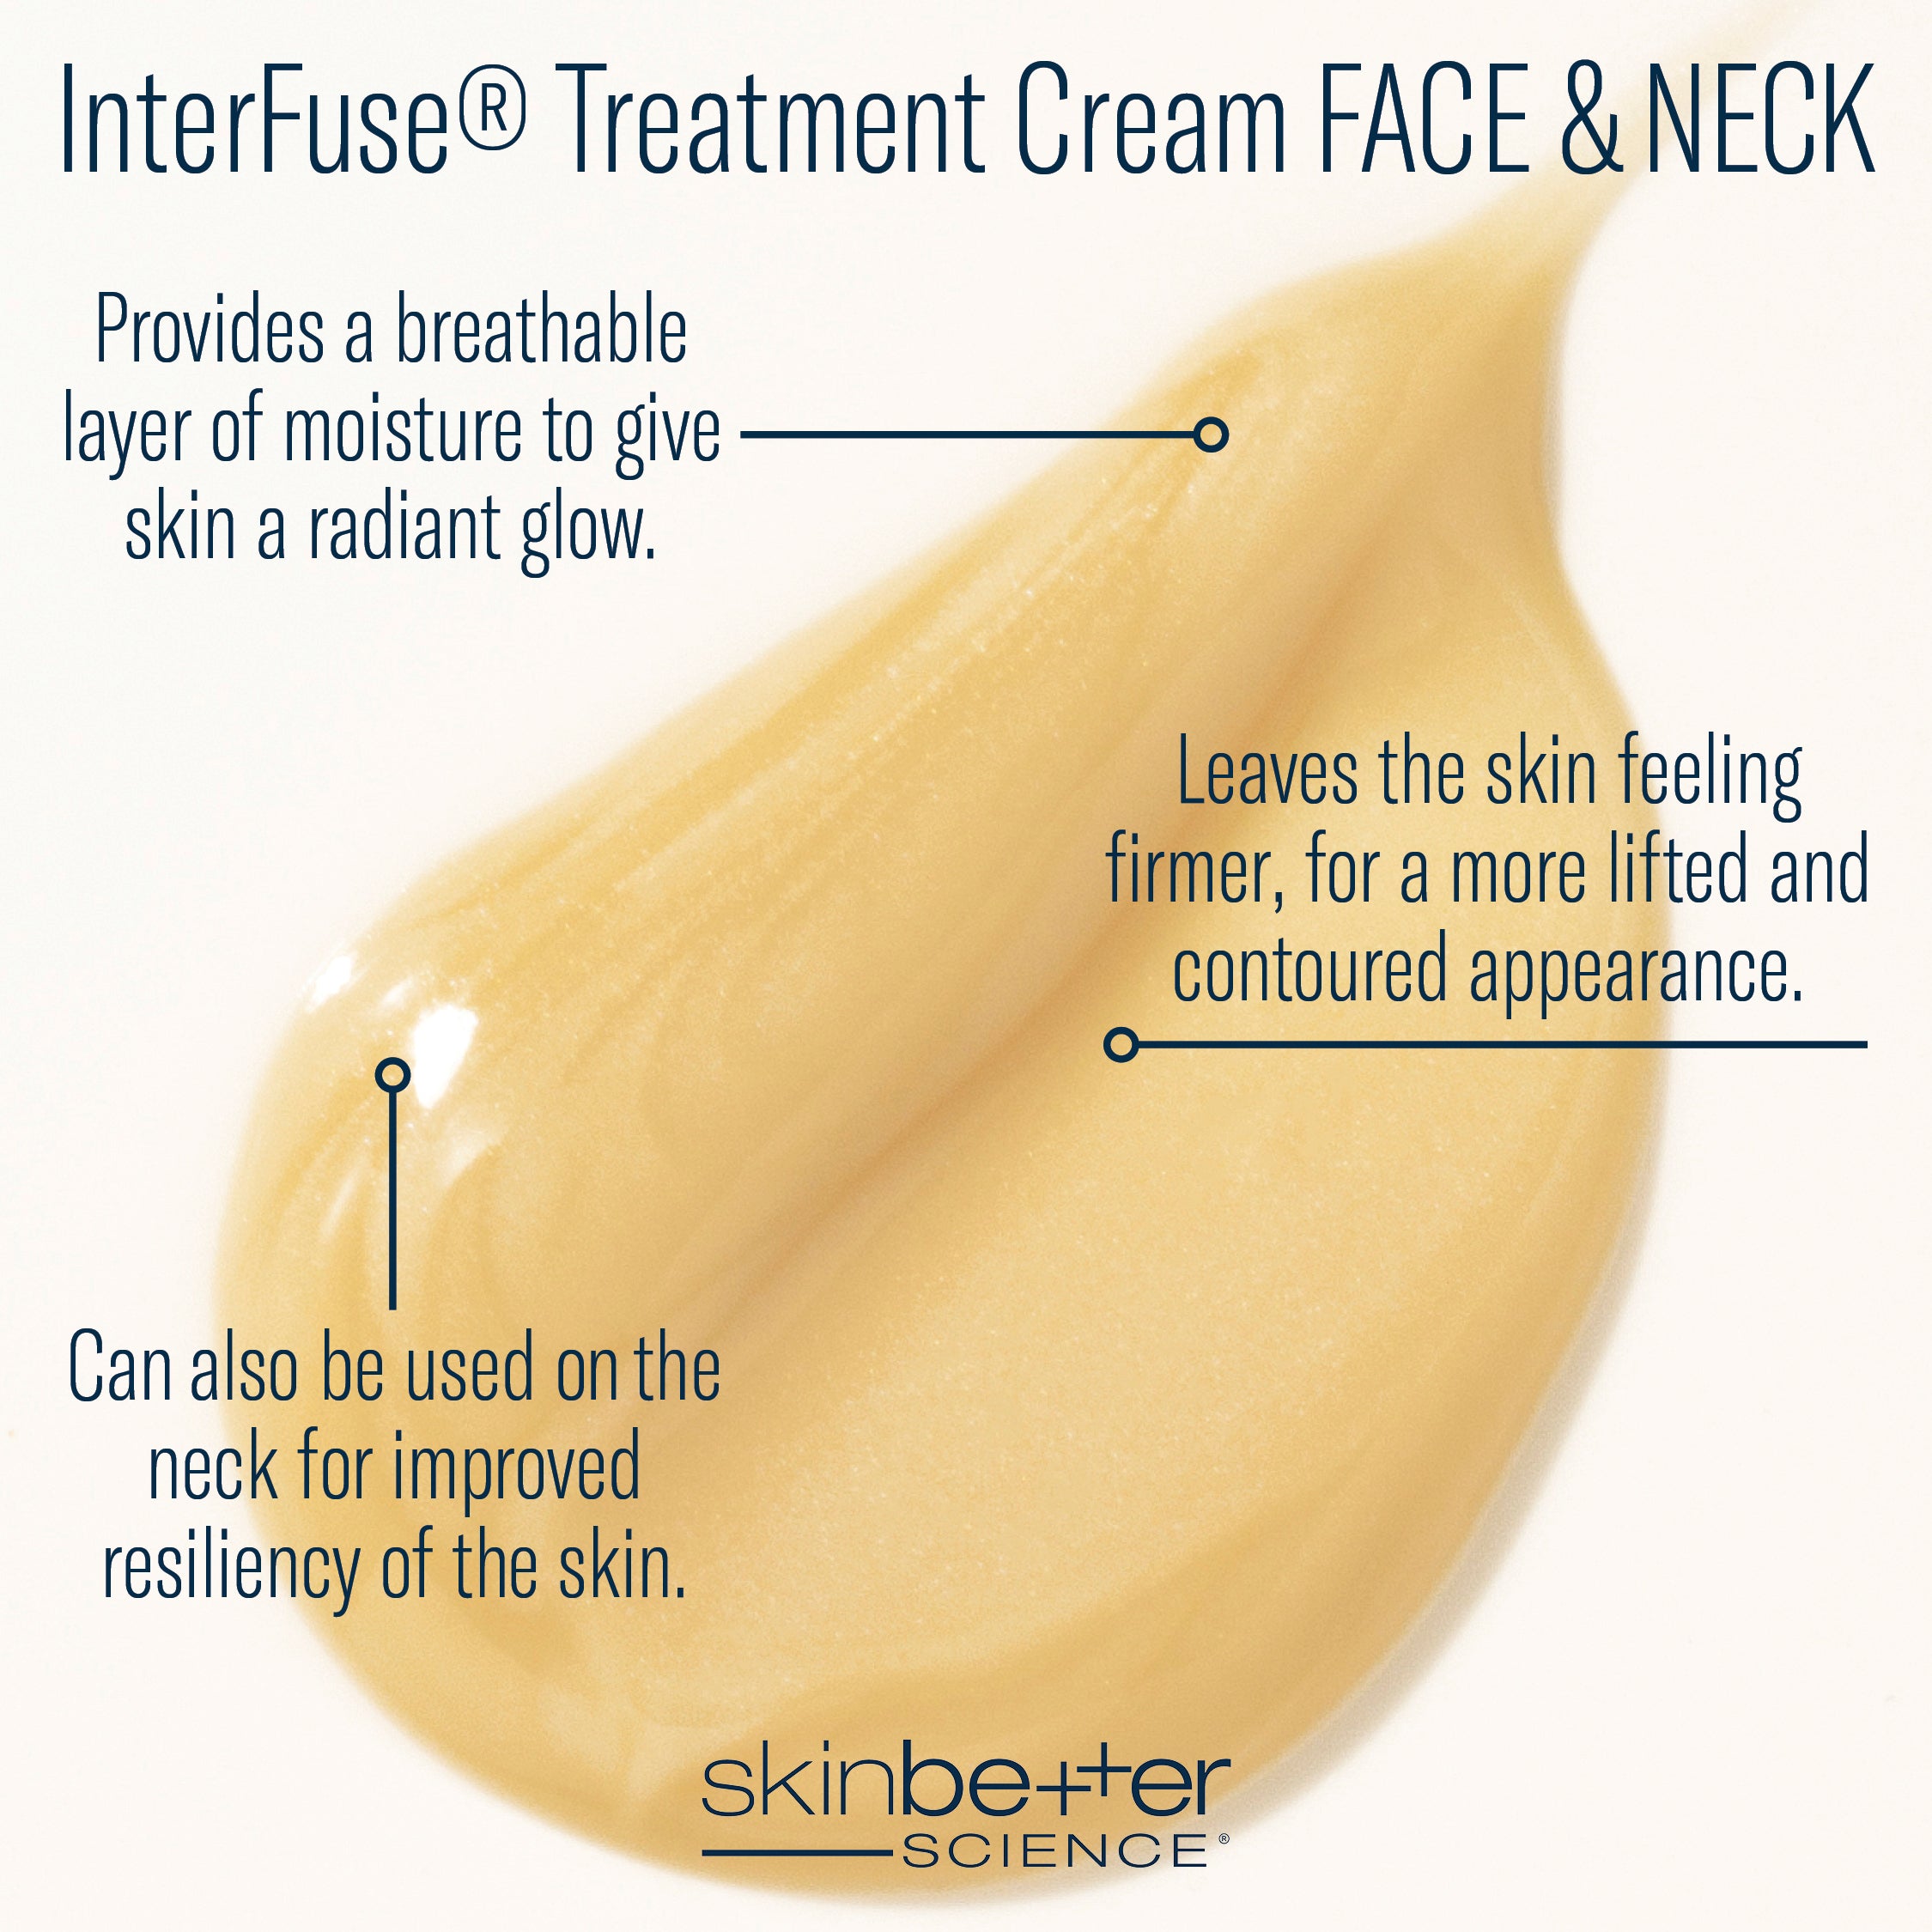 Skinbetter Science | InterFuse Treatment Cream FACE & NECK